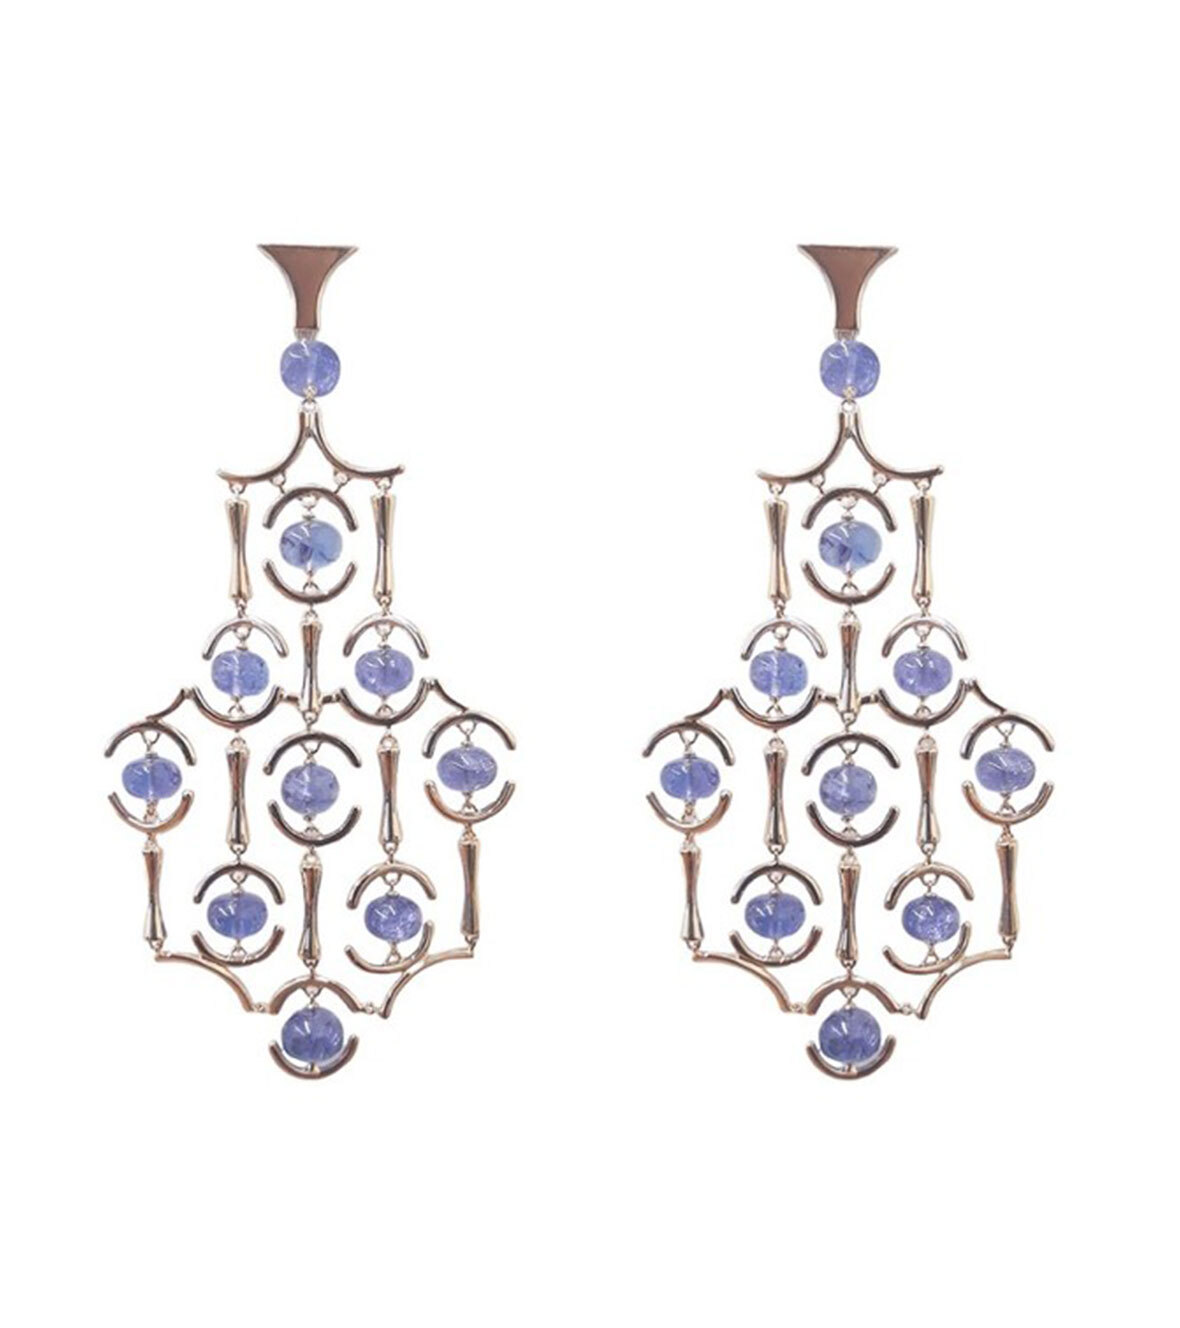 Yellow Gold Earrings with Tanzanite Stones